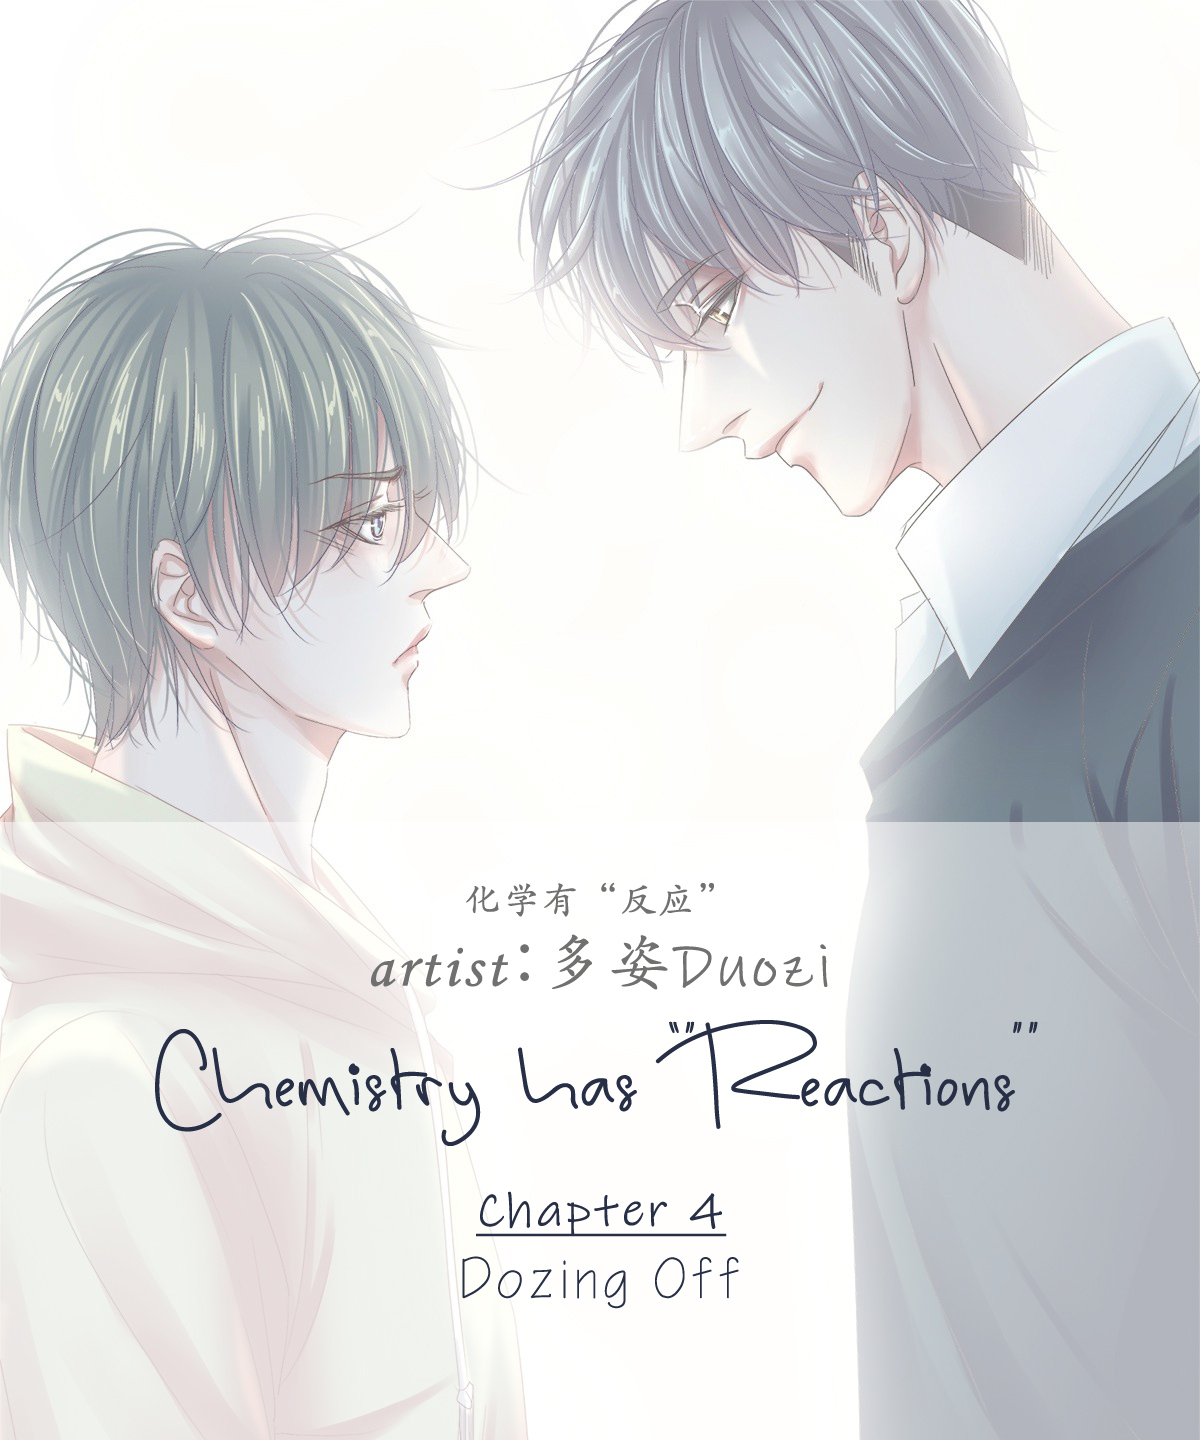 Chemistry has "Reactions" Vol. 1 Ch. 4